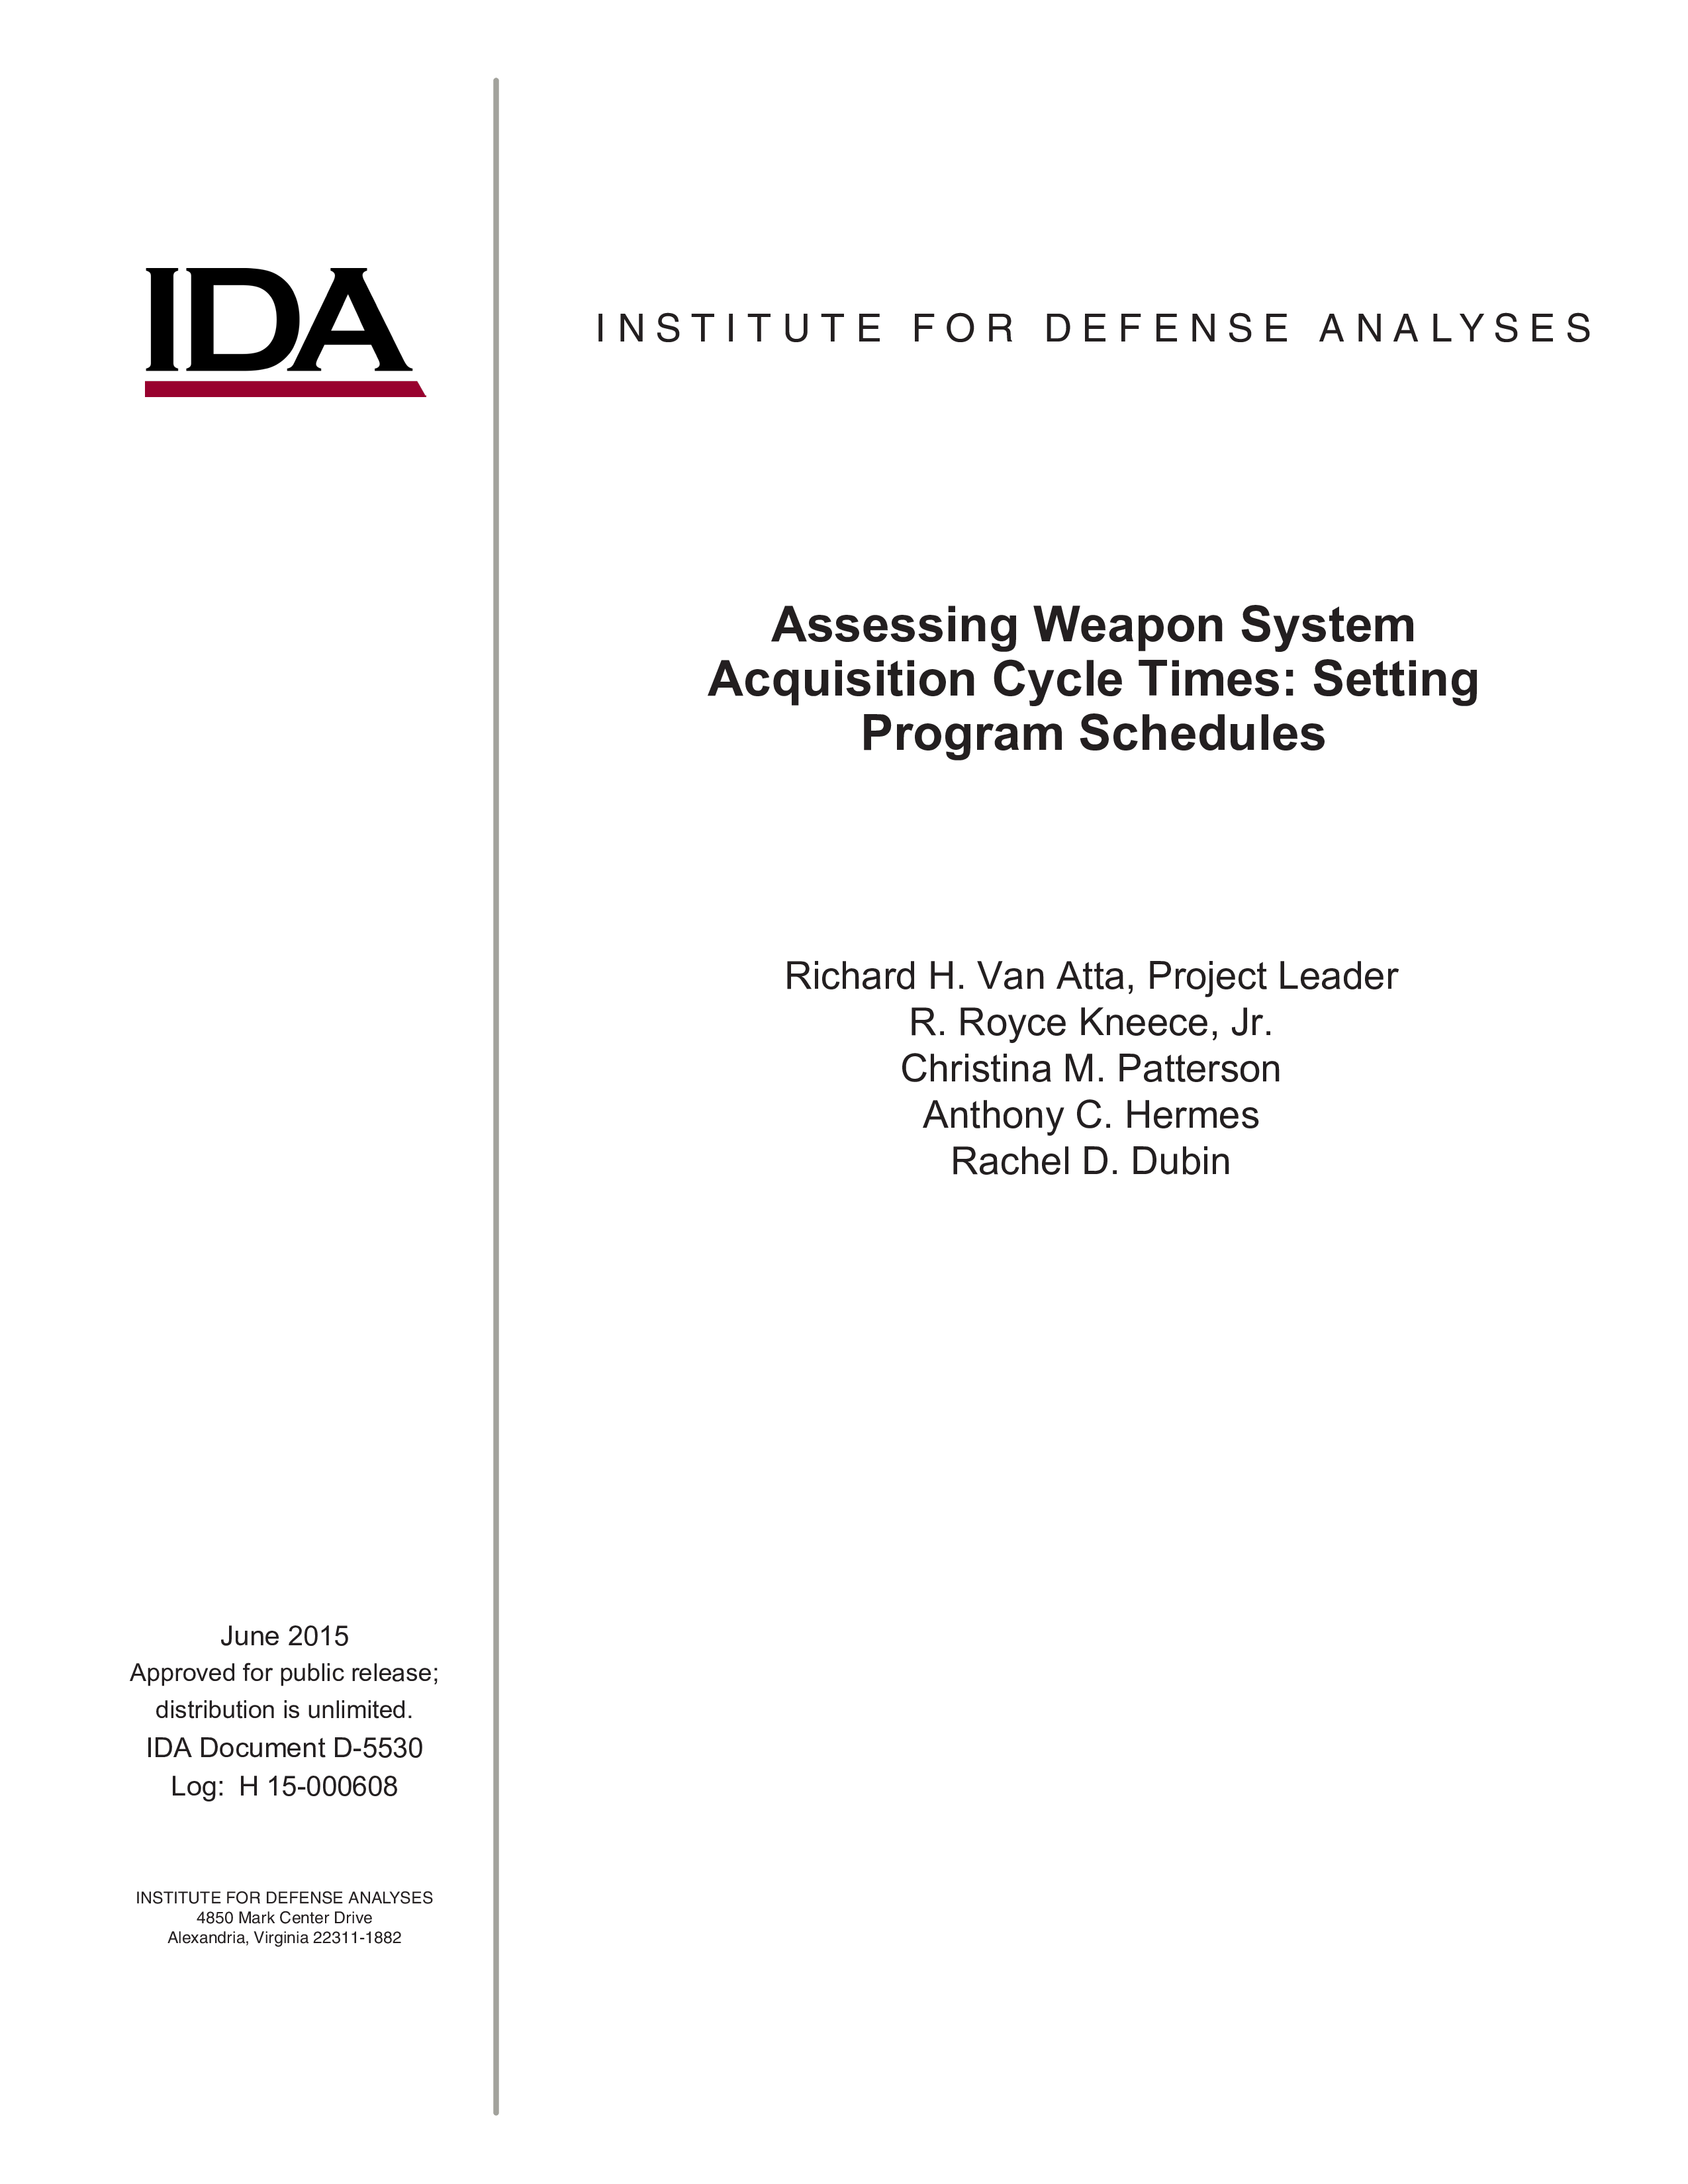 Assessing Weapon System Acquisition Cycle Times